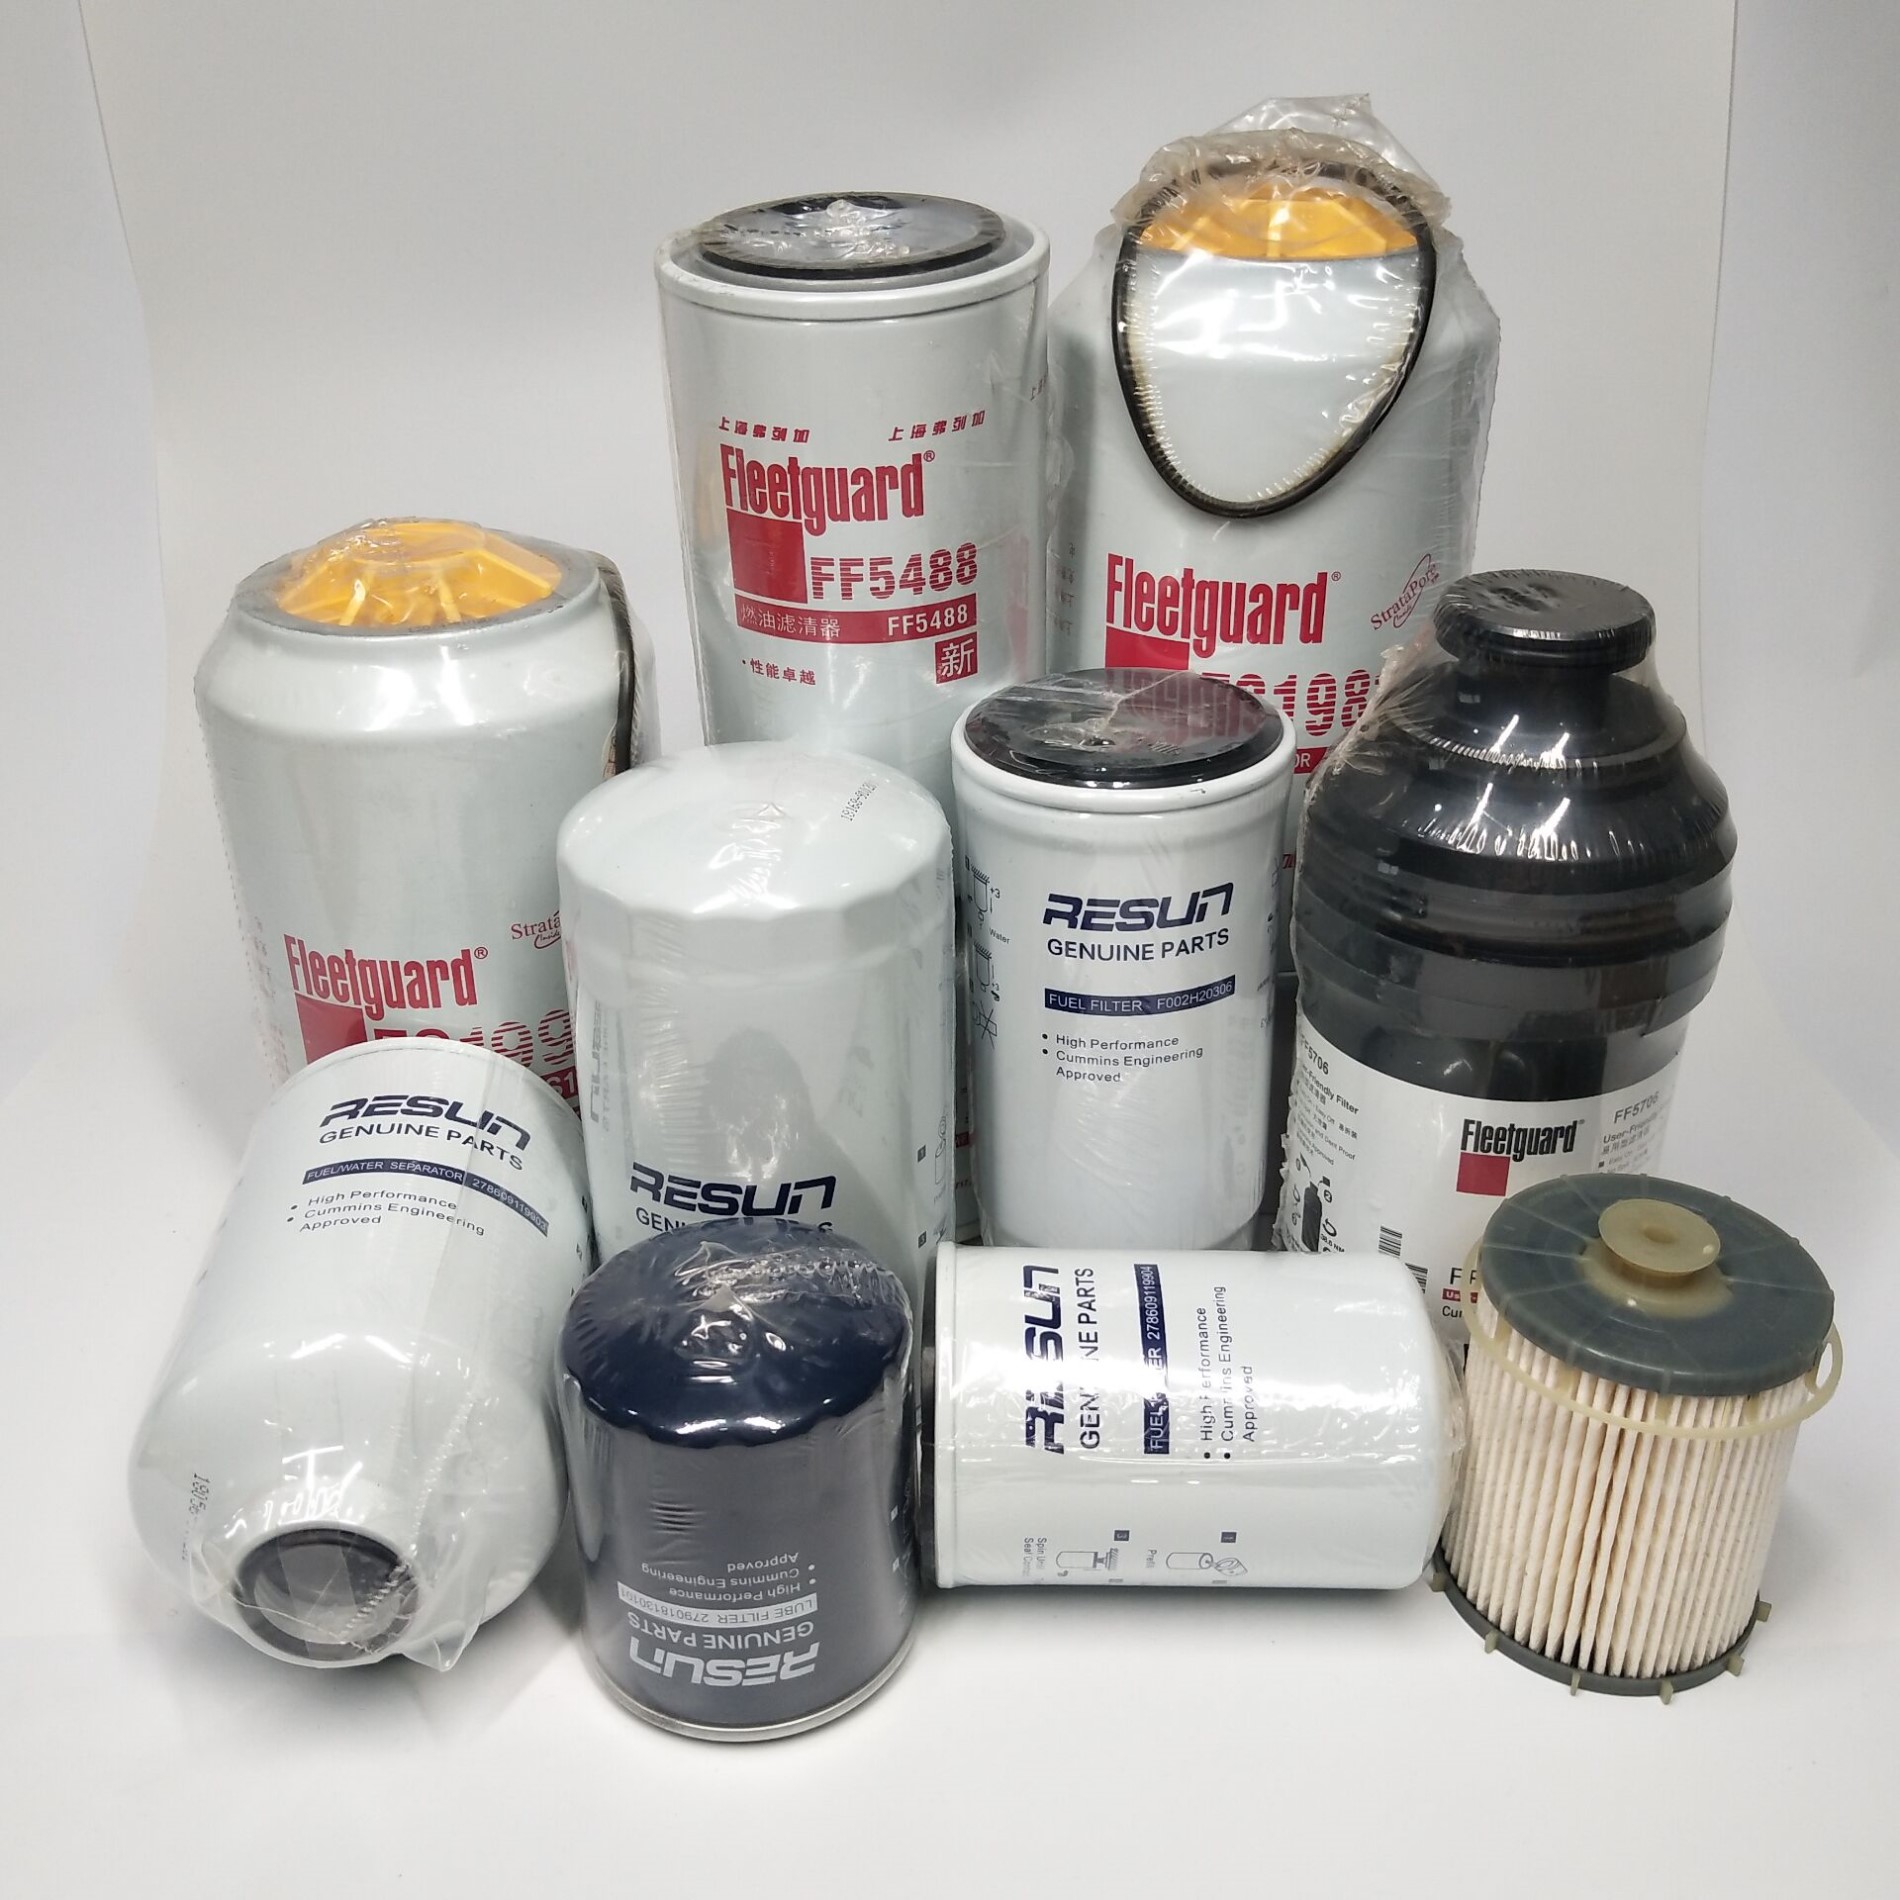 Supply Oil Filter For Passenger Cars And Trucks, Oil Filter For Passenger Cars And Trucks Factory Quotes, Oil Filter For Passenger Cars And Trucks Producers OEM